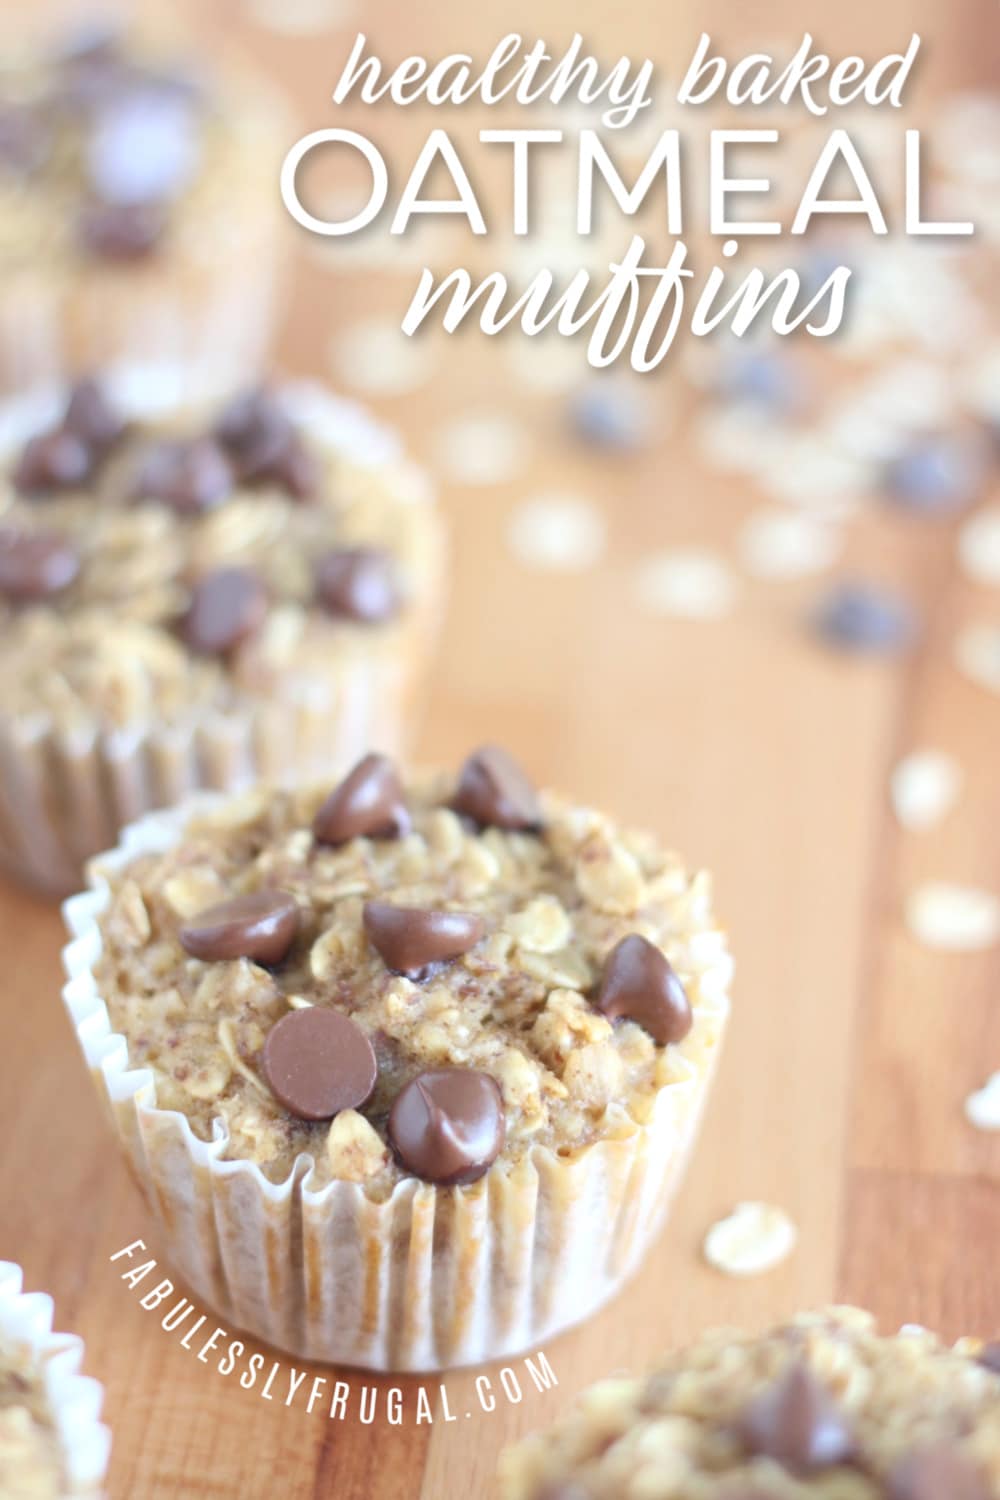 Healthy baked oatmeal muffins recipe